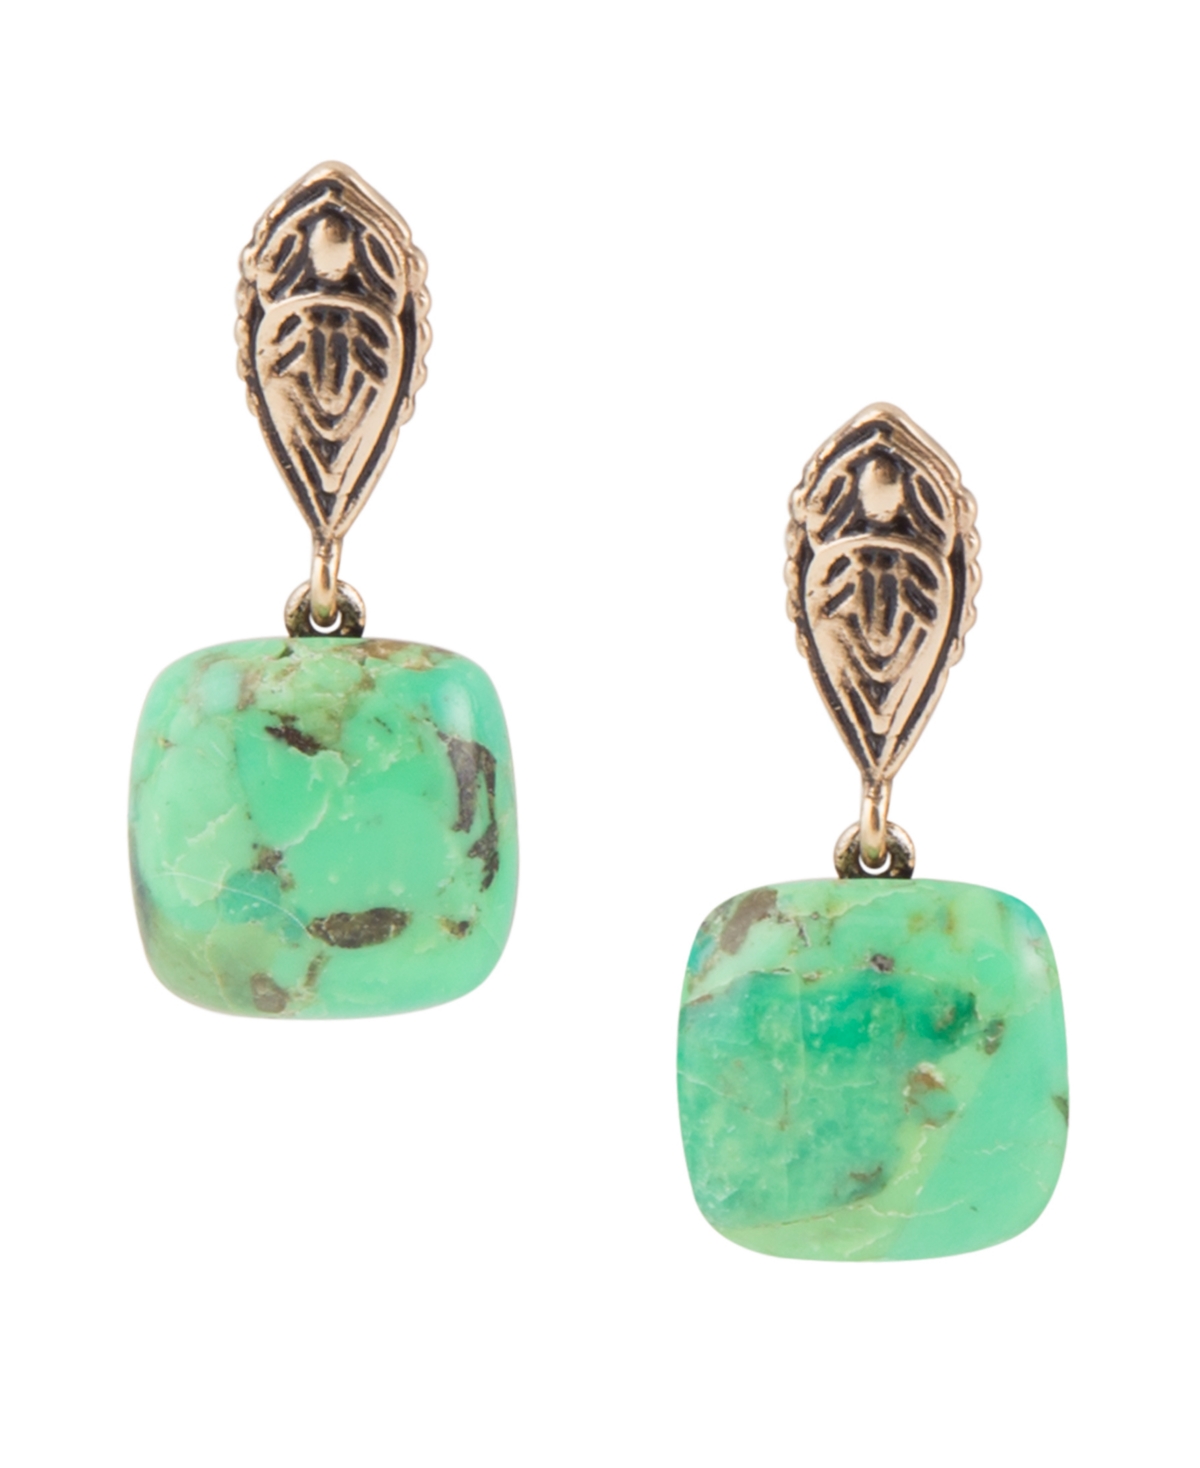 Ornate Bronze and Genuine Lime Turquoise Drop Earrings - Lime Turquoise